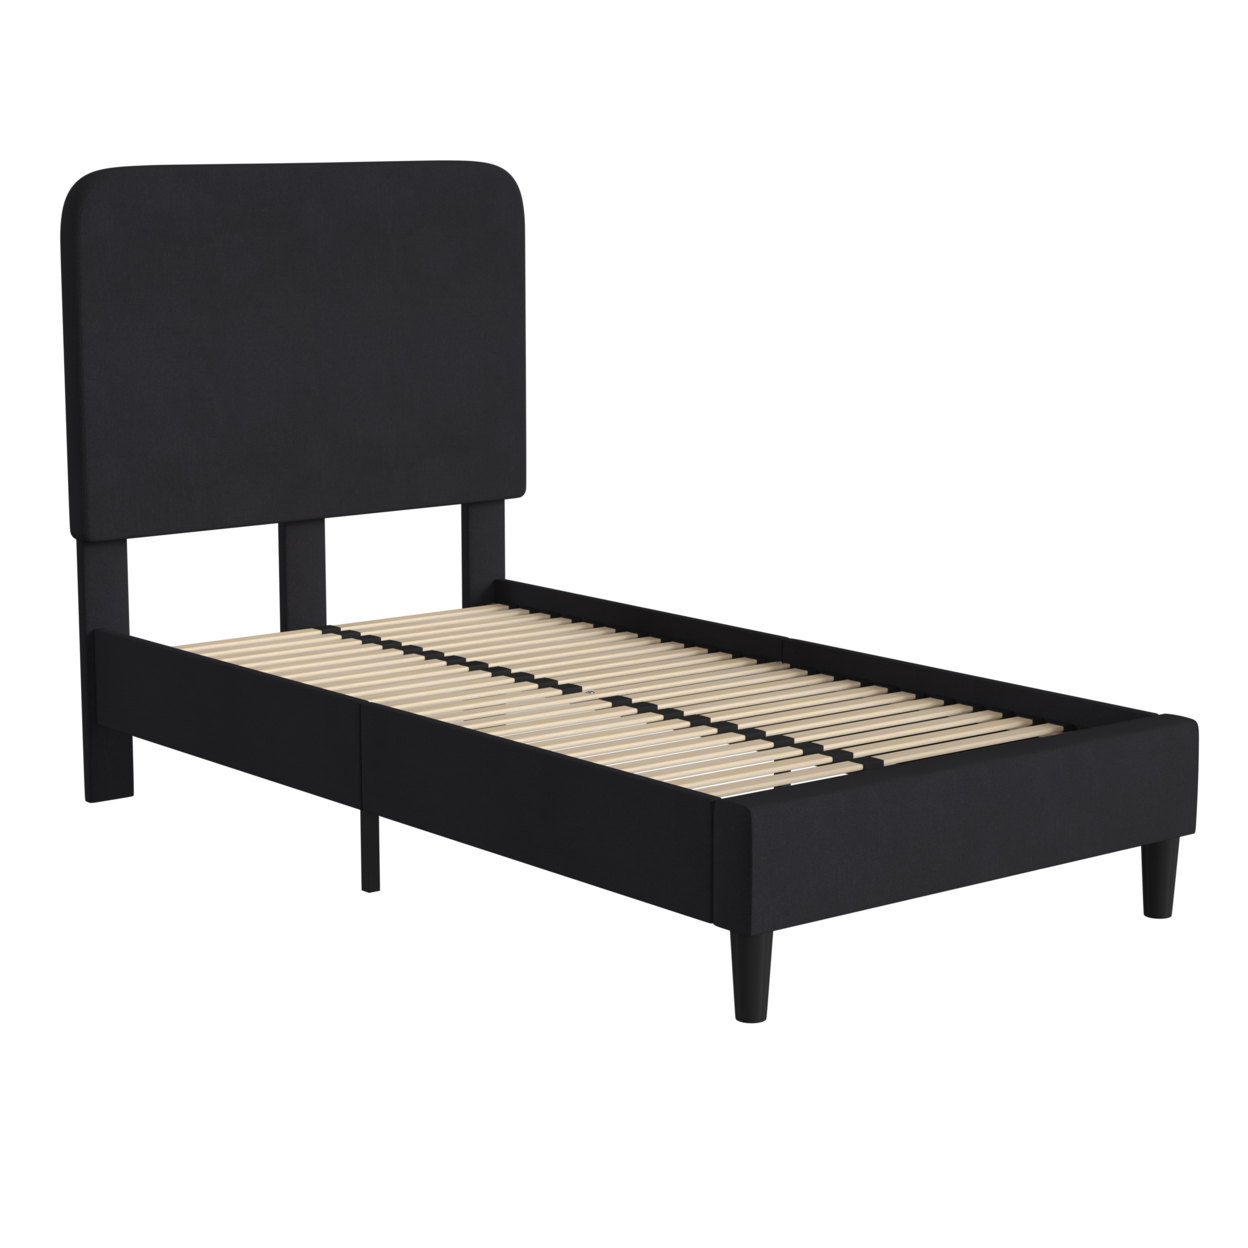 Addison Charcoal Twin Fabric Upholstered Platform Bed - Headboard With Rounded Edges - No Box Spring Or Foundation Needed